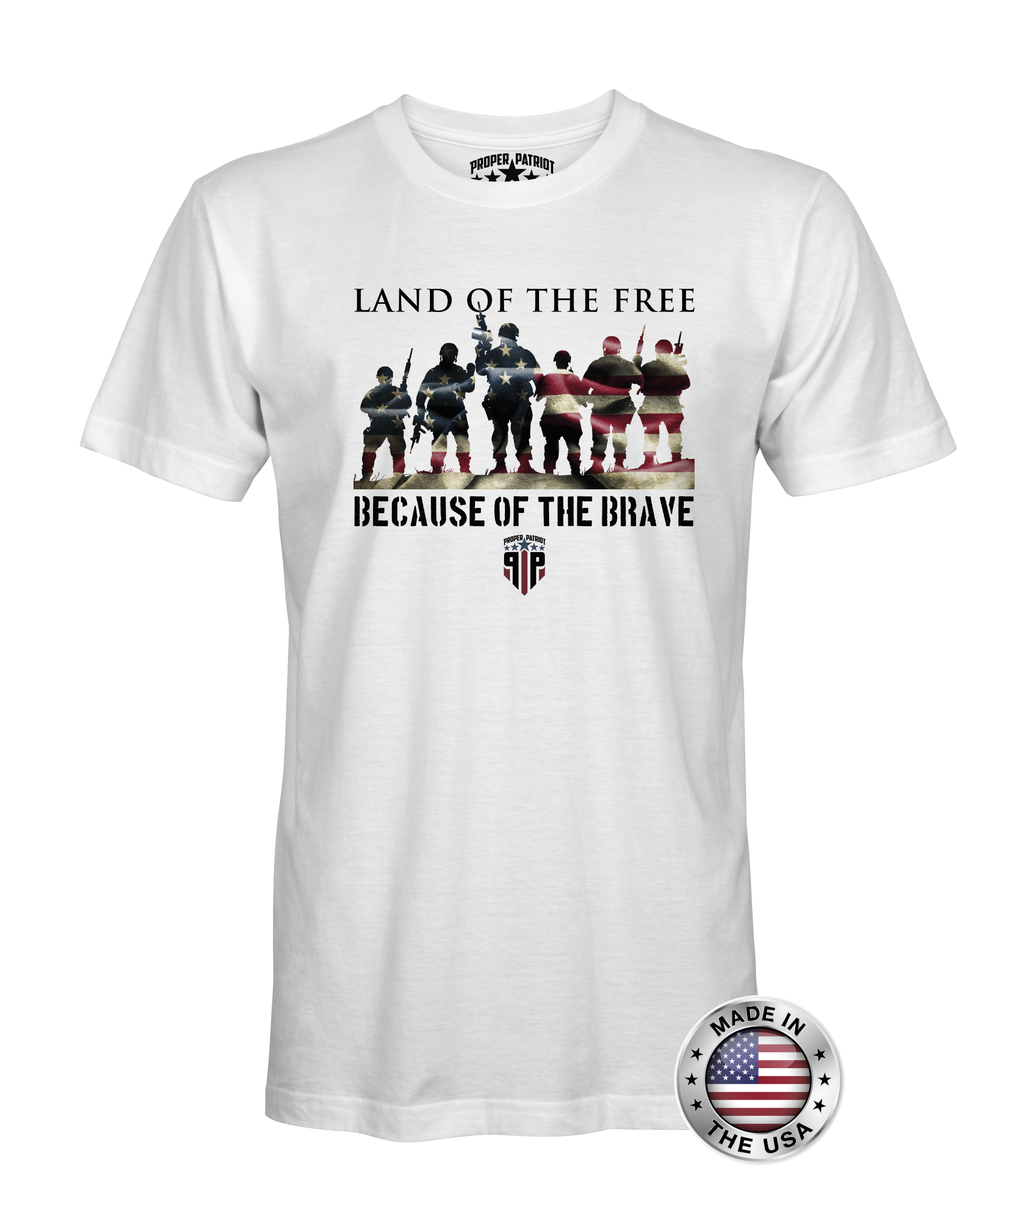 Land Of The Free Because Of The Brave - American Flag Shirt - Patriotic Shirts for Men - Proper Patriot